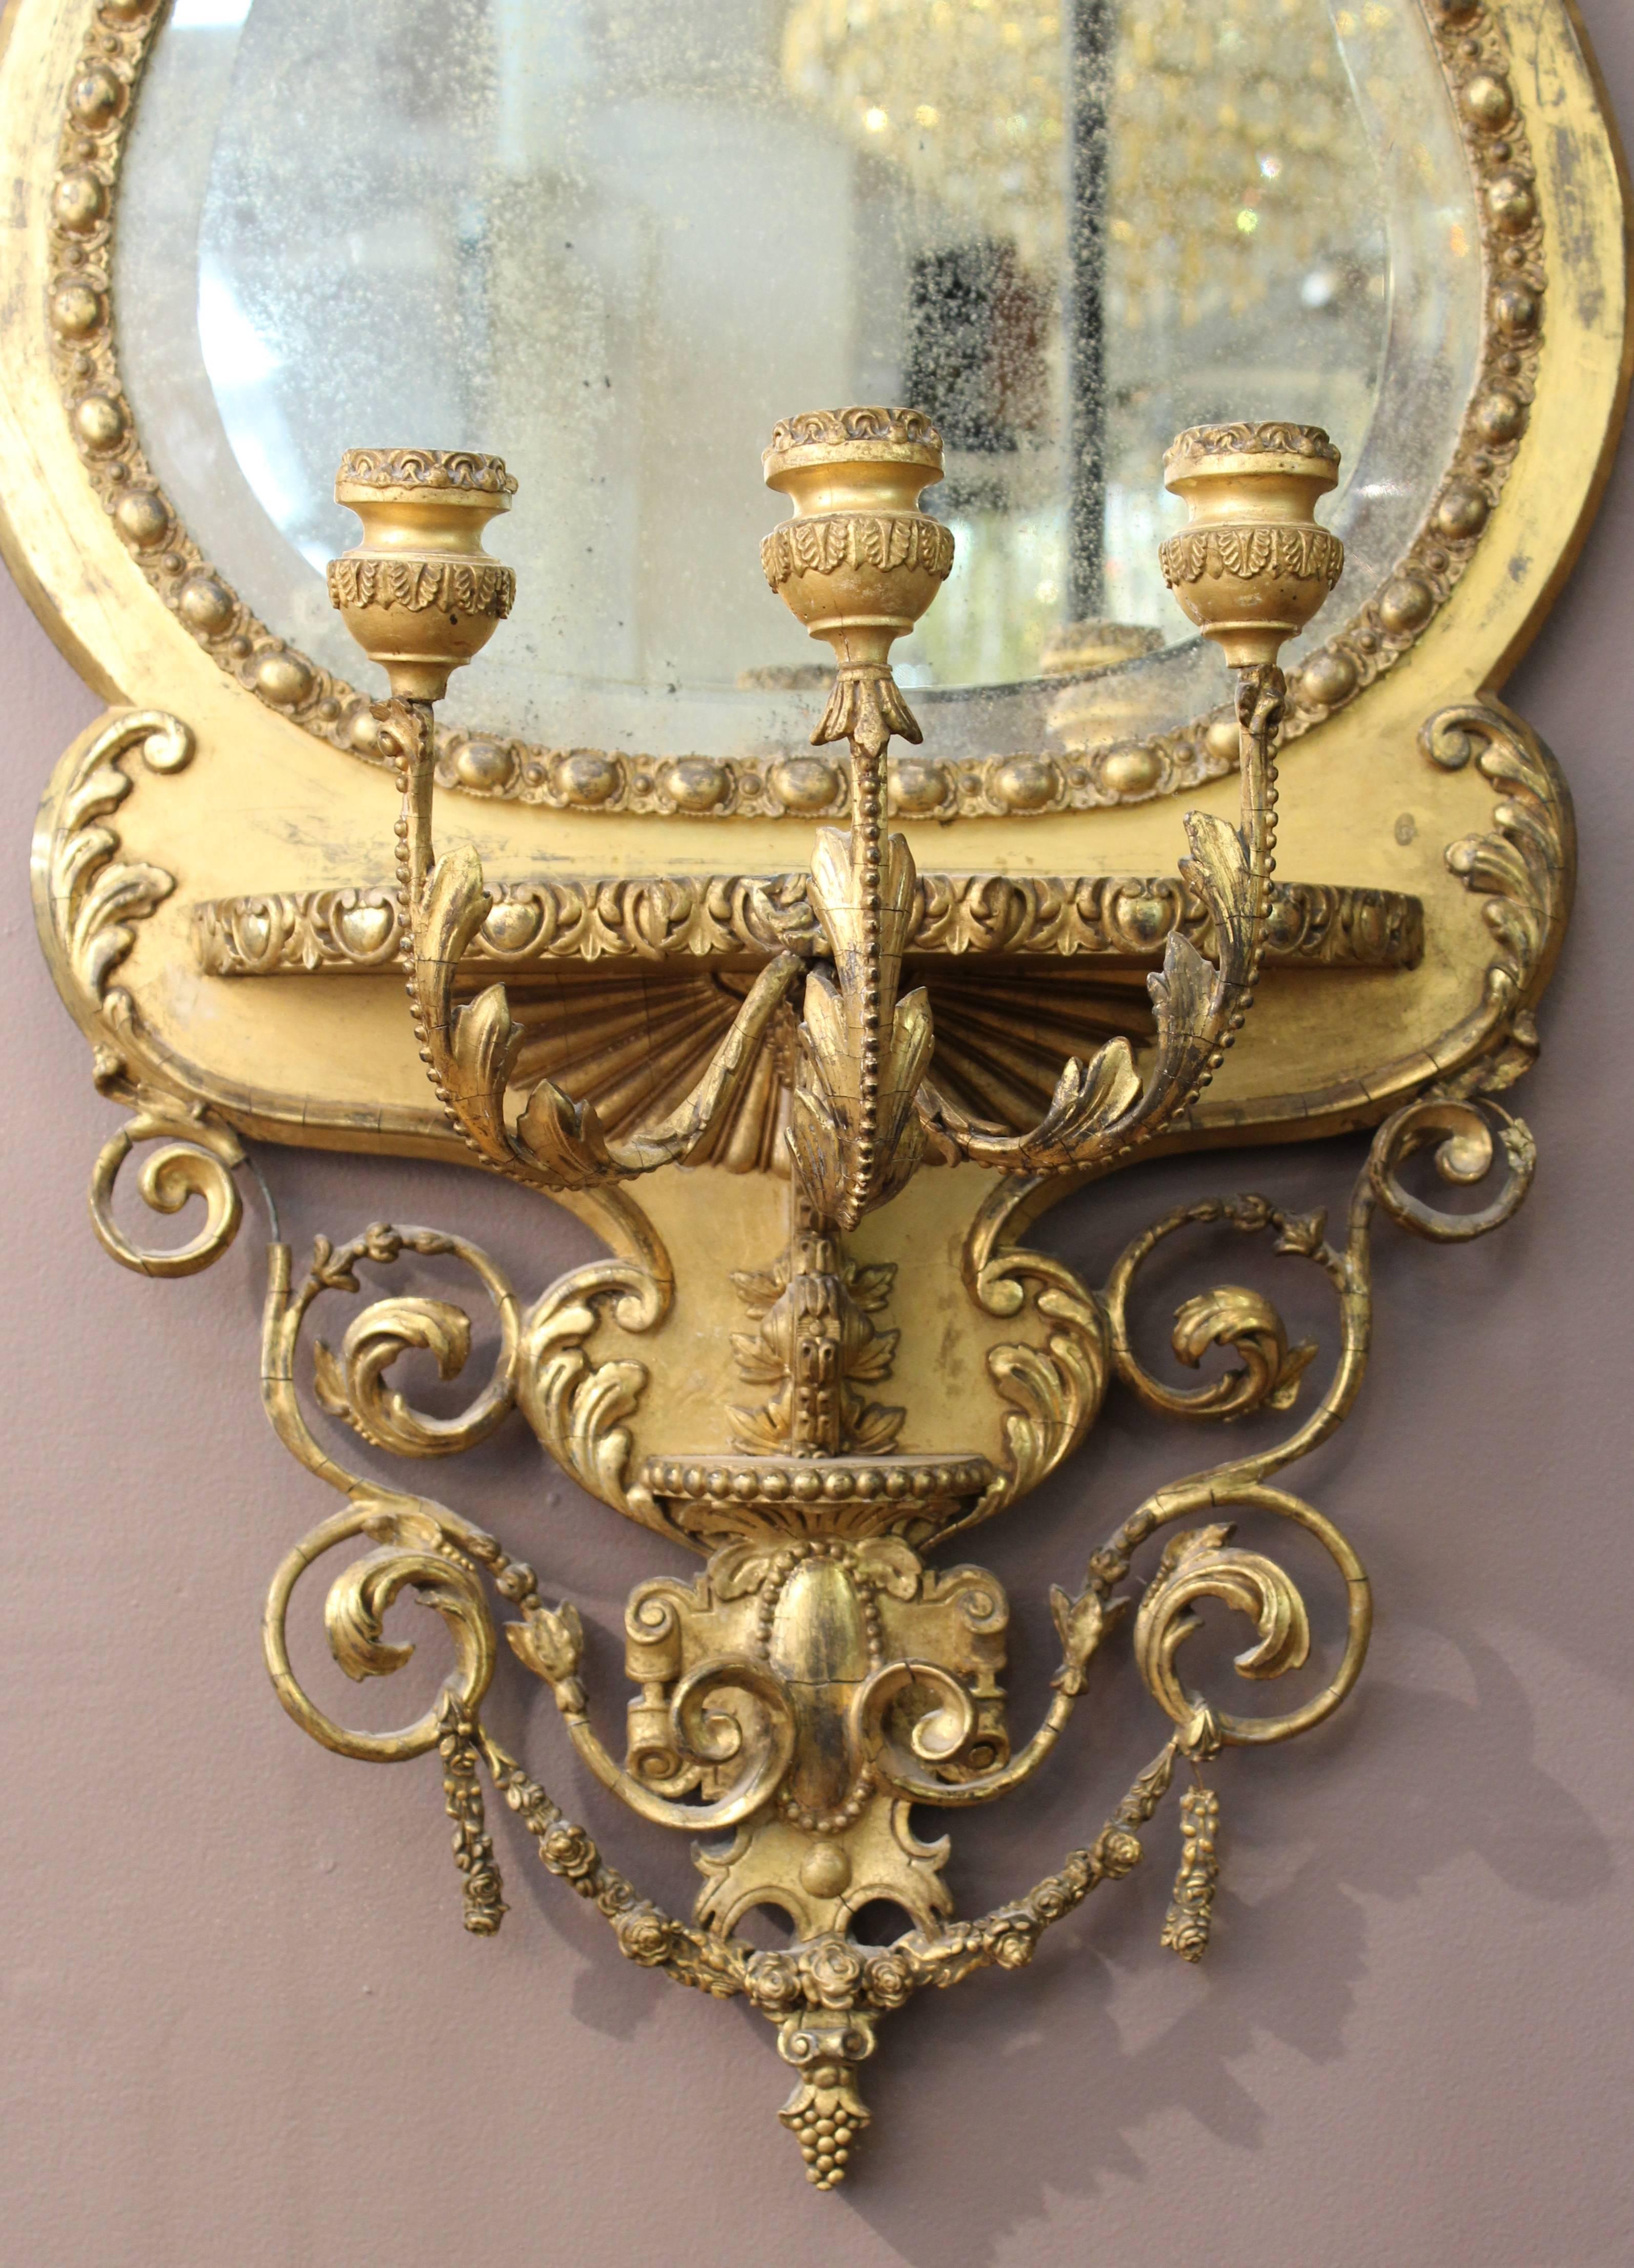 George III Period Gesso and Giltwood Girandole with Candlabra In Good Condition For Sale In New York, NY